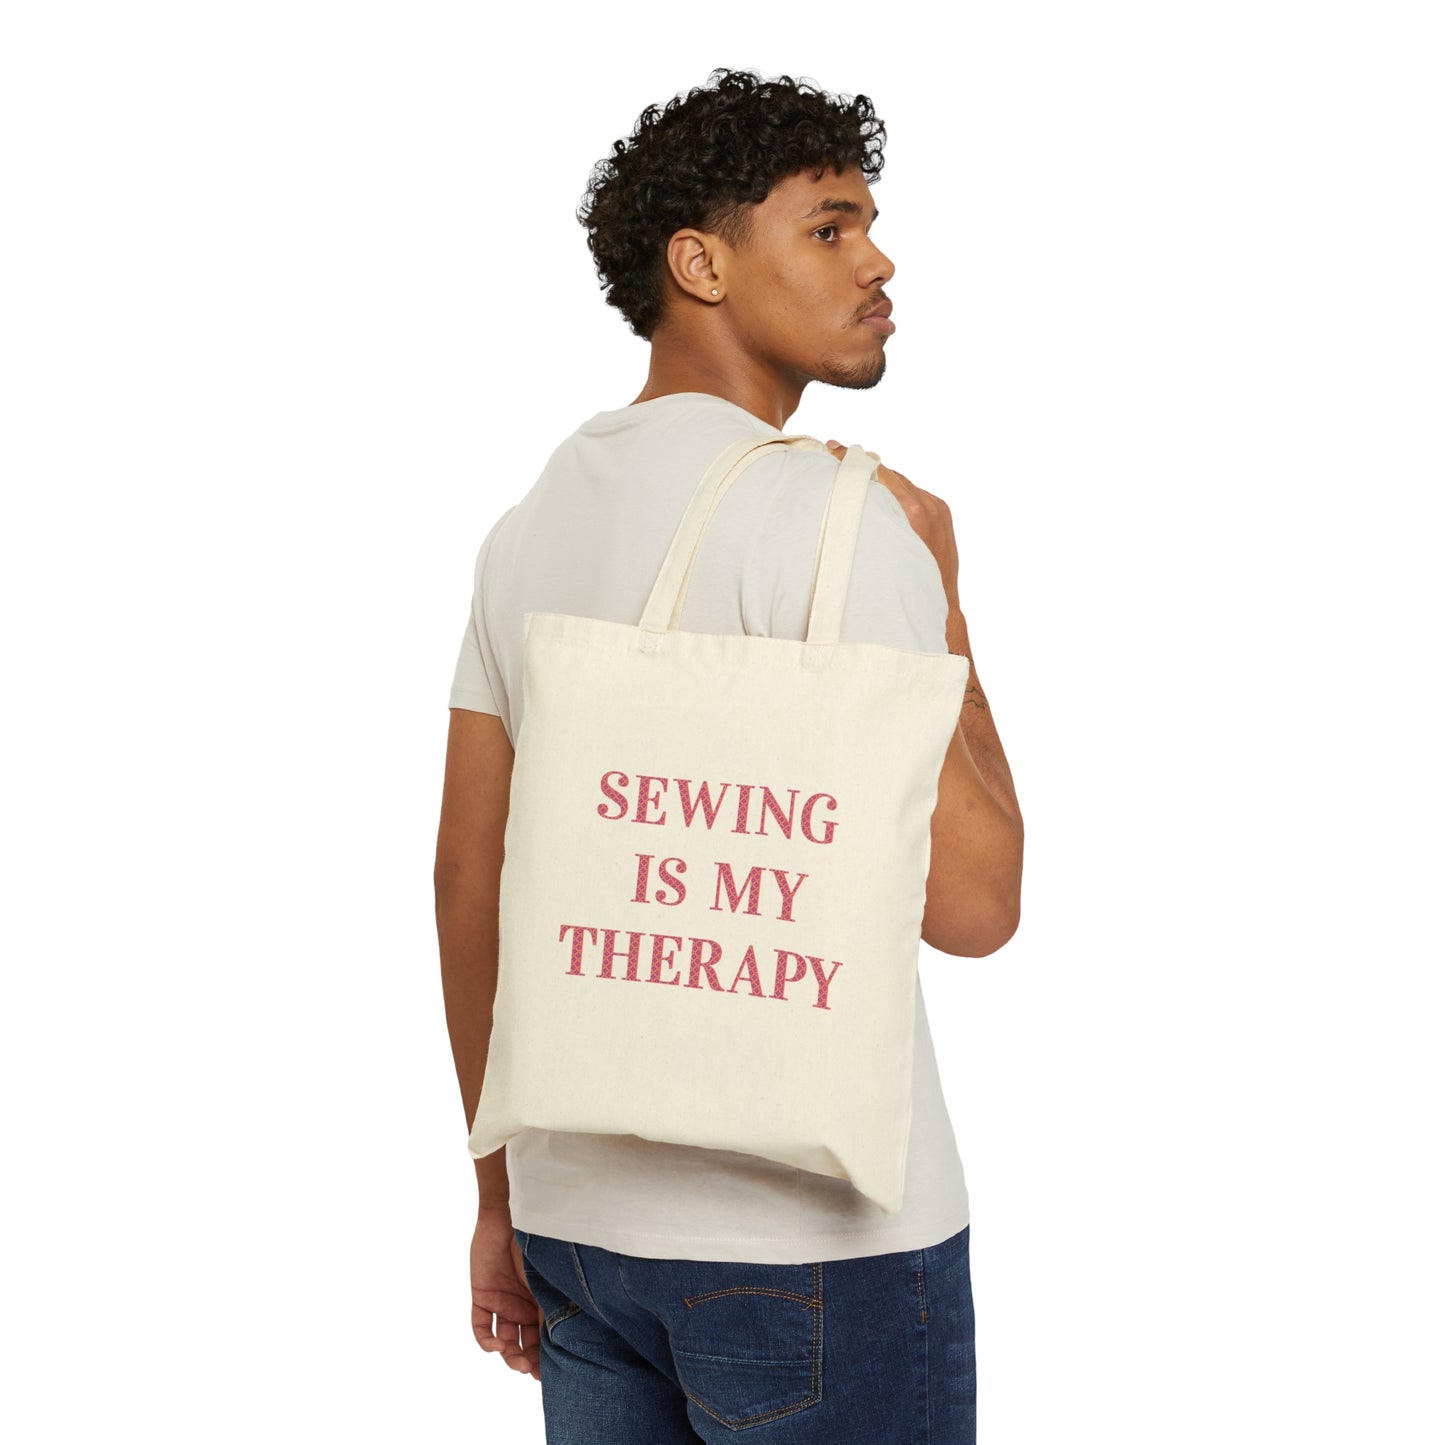 Sewing is my therapy canvas bag being held by a young person.